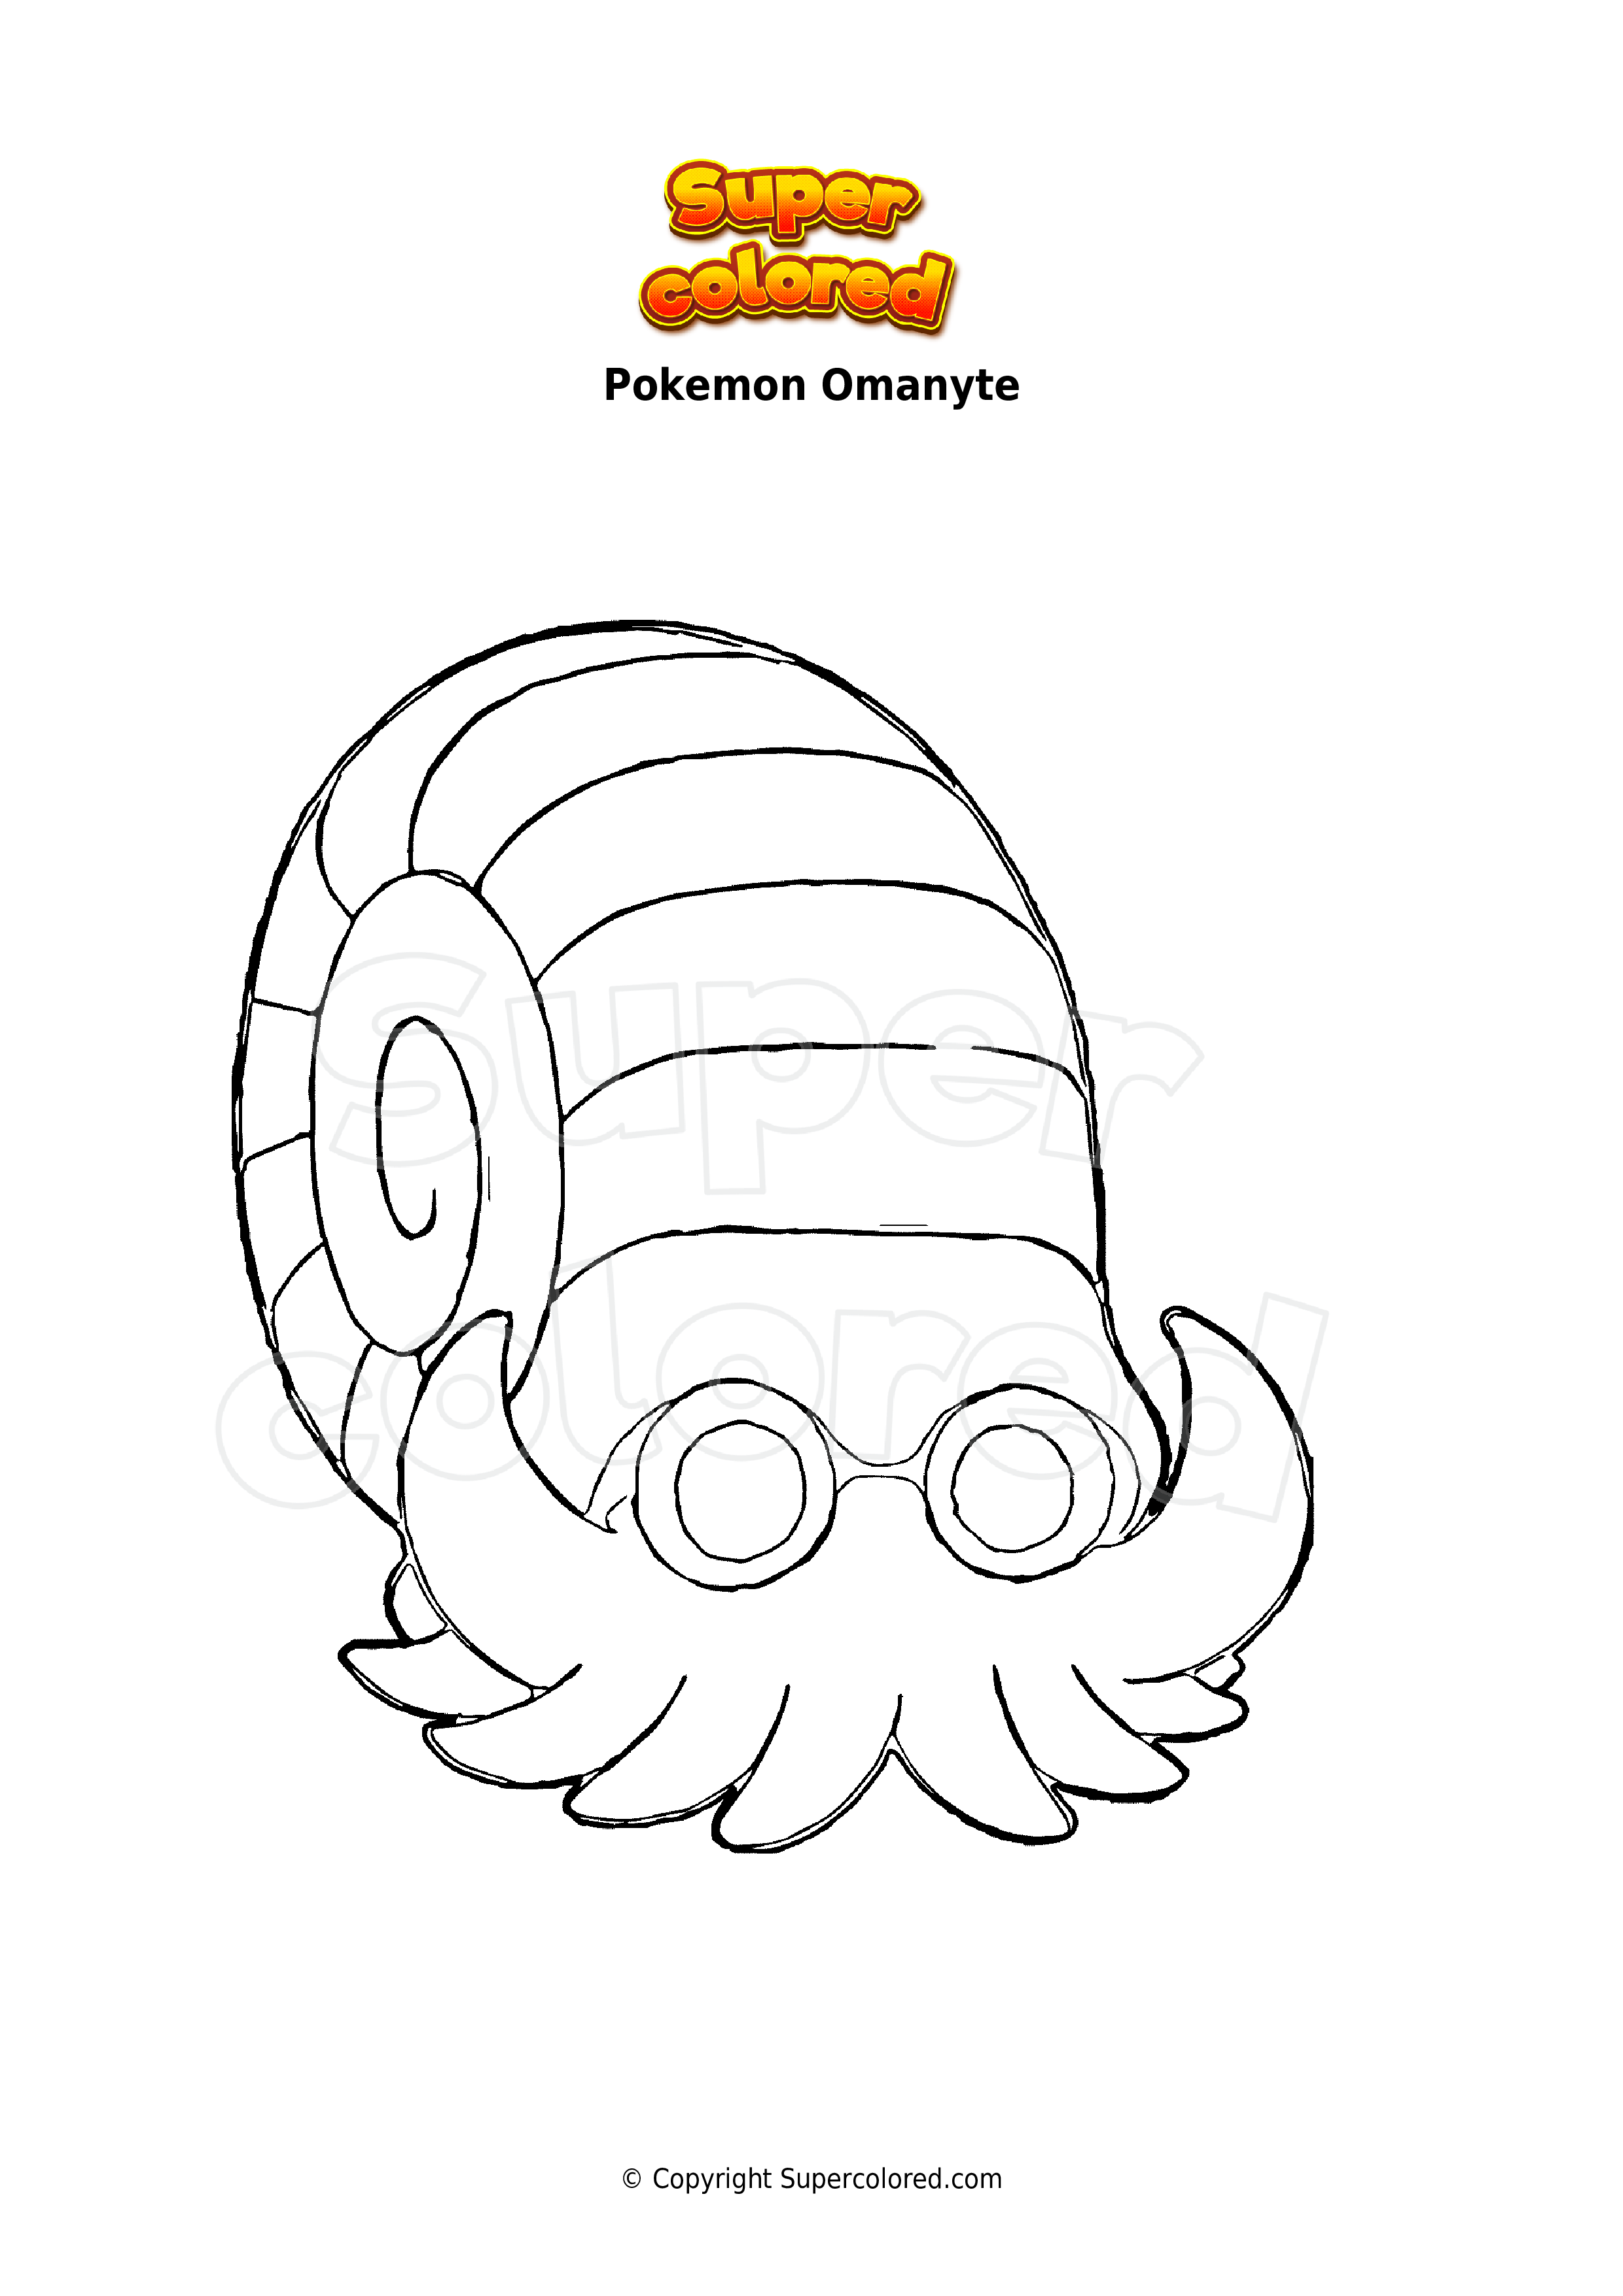 Coloring page Pokemon Cinderace Gigamax - Supercolored.com